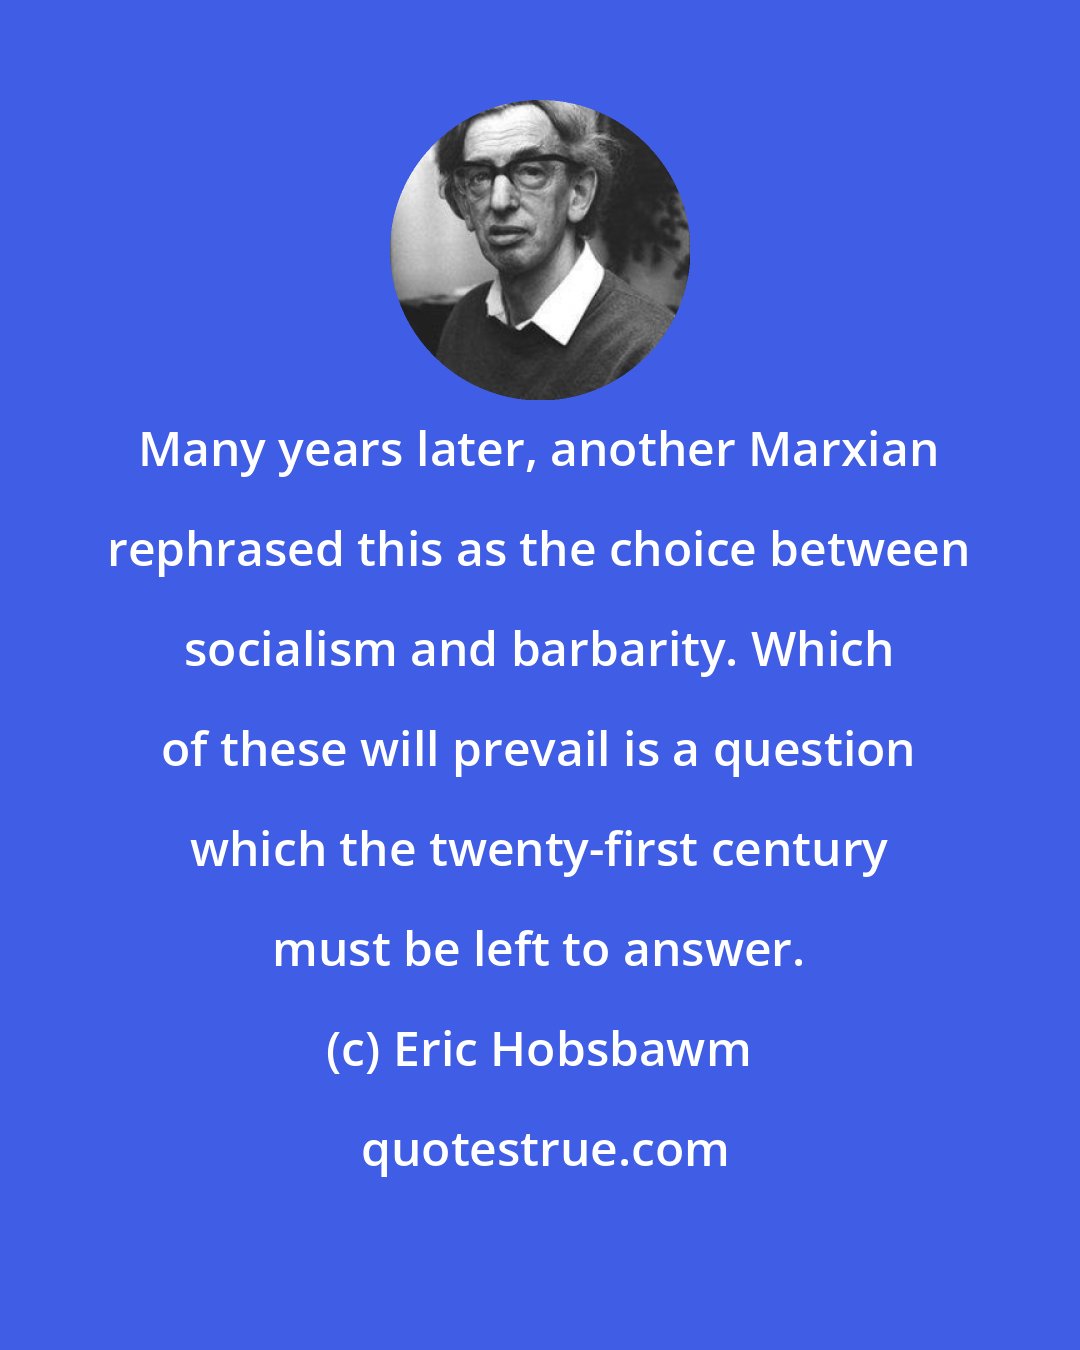 Eric Hobsbawm: Many years later, another Marxian rephrased this as the choice between socialism and barbarity. Which of these will prevail is a question which the twenty-first century must be left to answer.